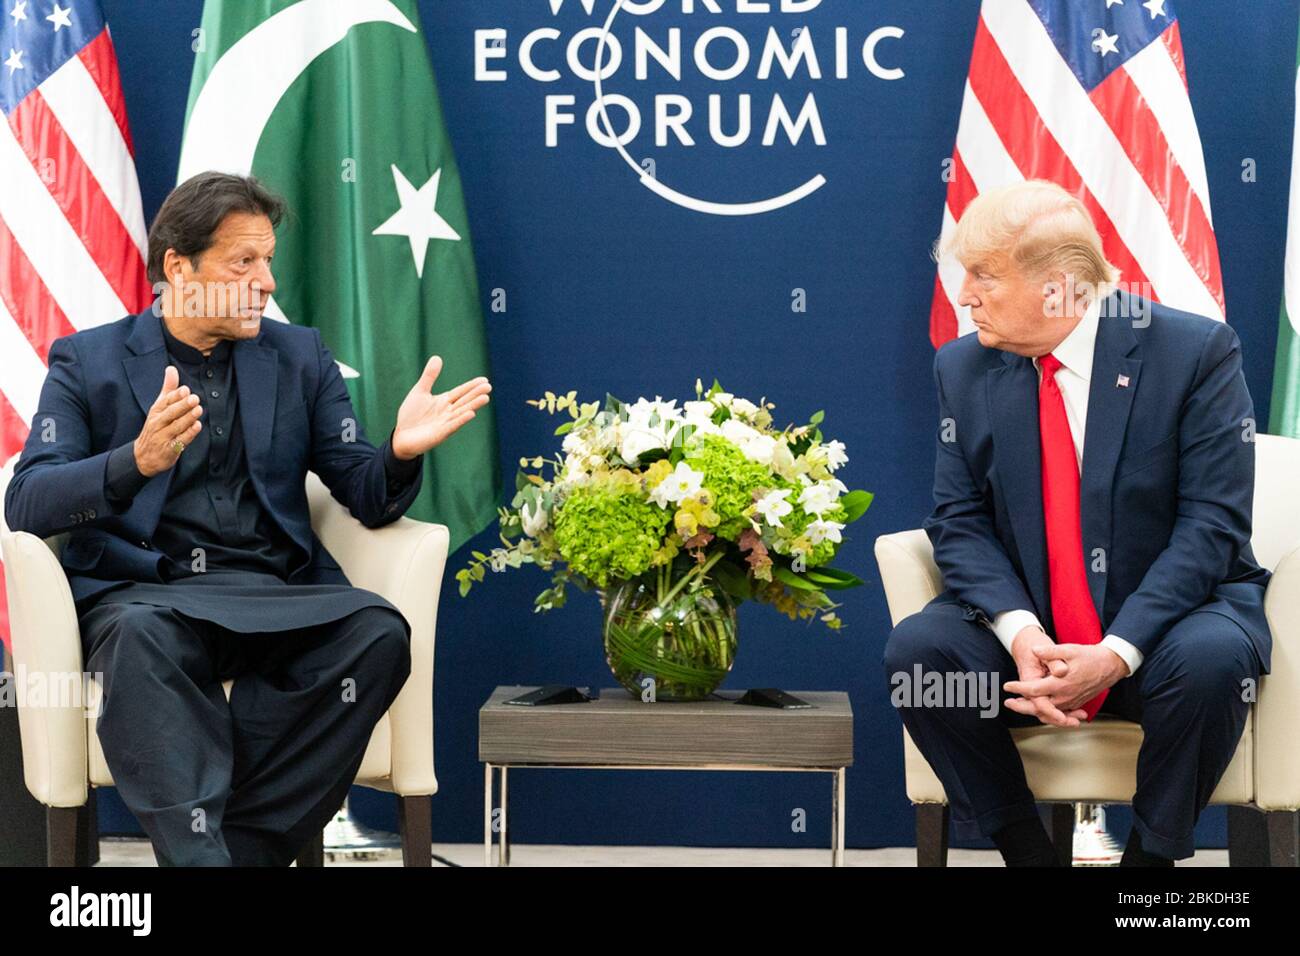 President Donald J. Trump meets with the Prime Minister of the Islamic Republic of Pakistan Imran Khan Tuesday, Jan. 21, 2020, at the Davos Congress Centre in Davos, Switzerland. President Trump at Davos Stock Photo